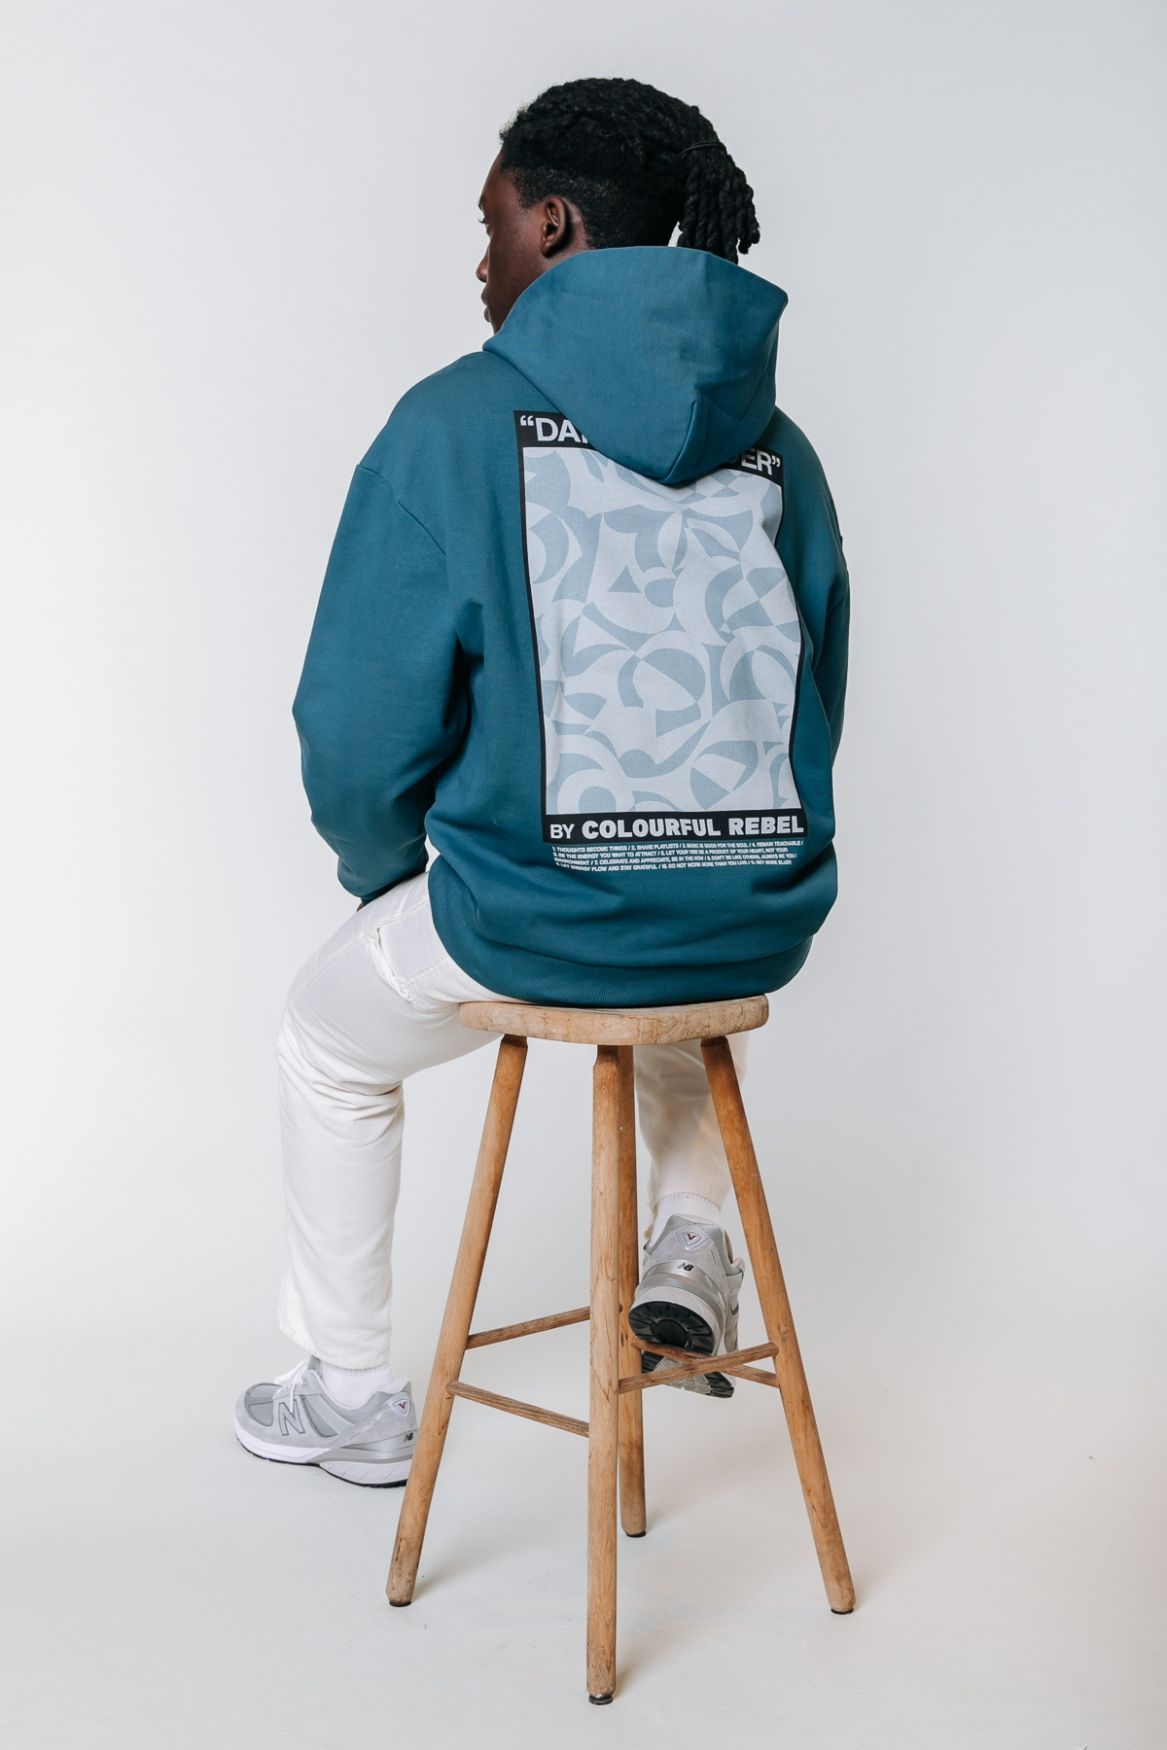 Colourful Rebel Daily Reminder Relaxed Clean Pkt Hoodie 515 dark turquoise 00102914-EKA26011600000008